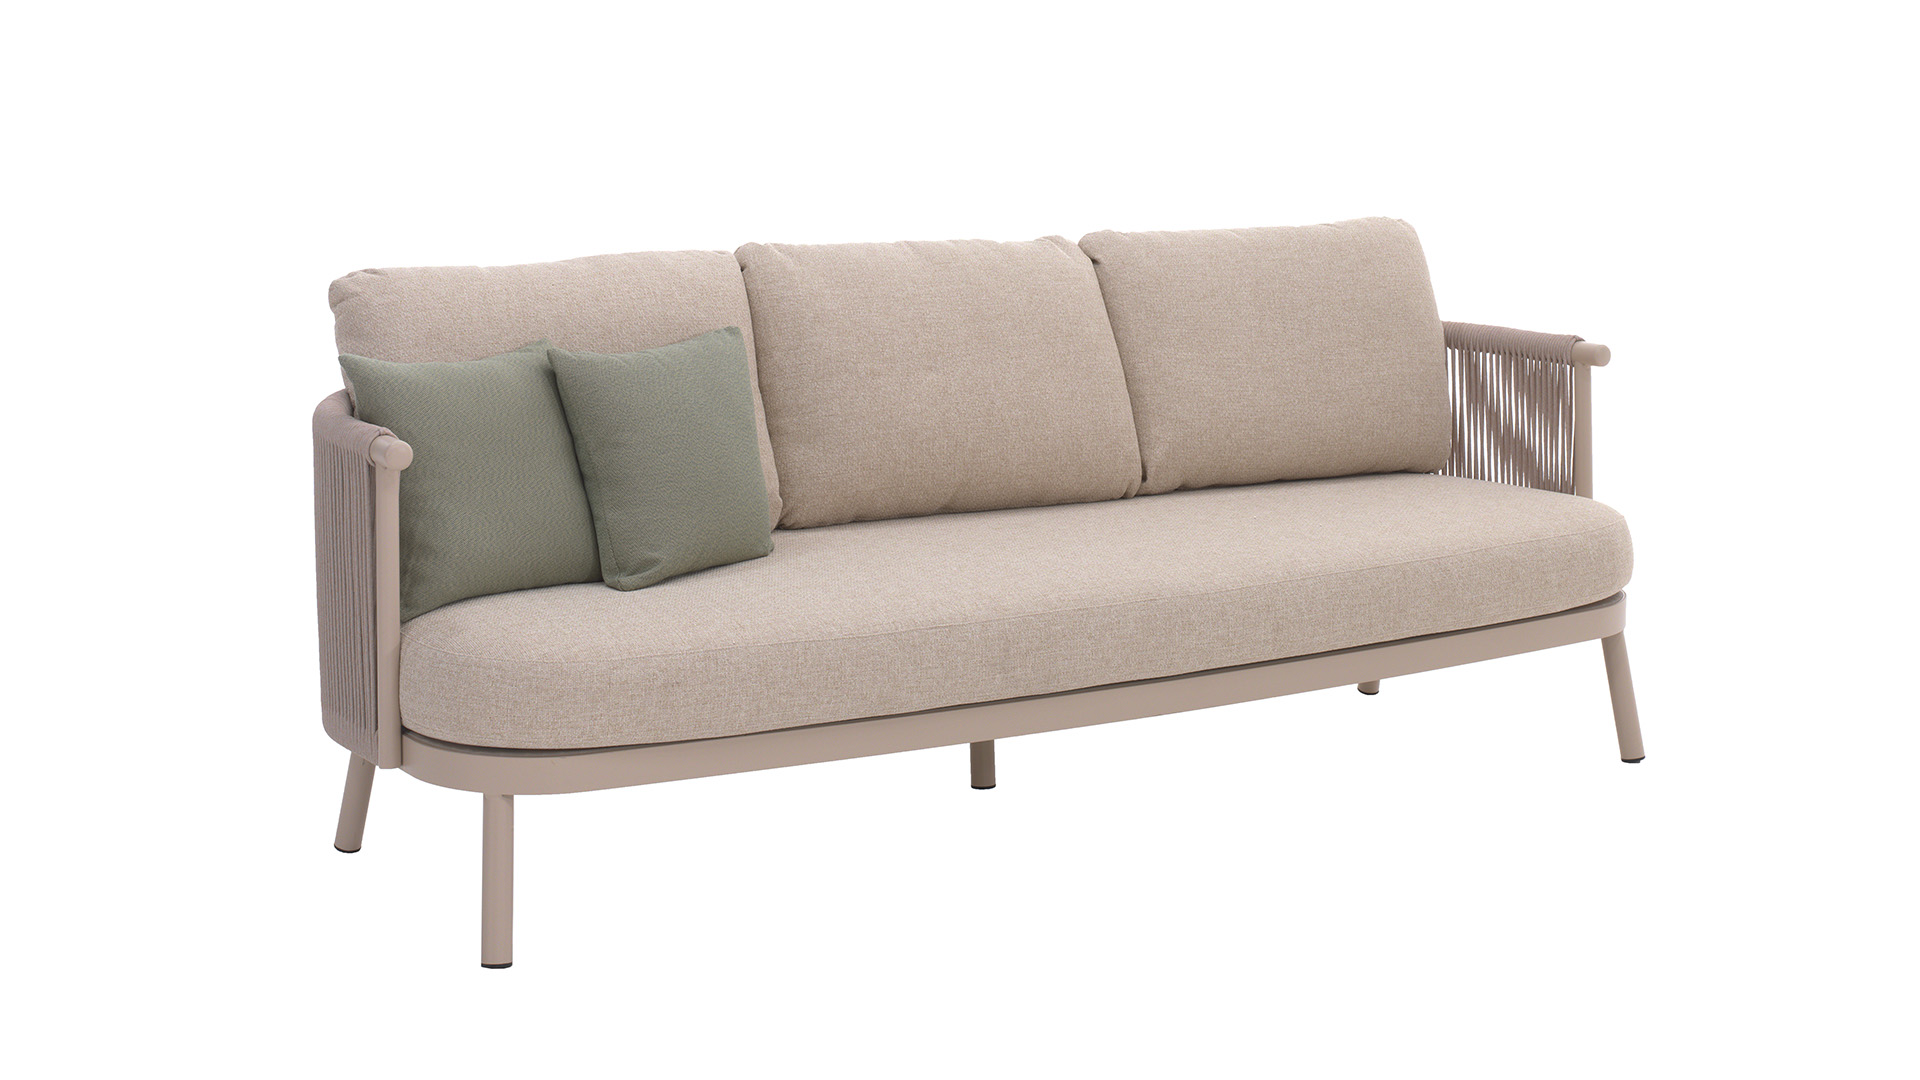 Alu Lounge Set Milan 1 x 3-Seater + 2x 1-Seater + S/2 Coffee Tables Alu Linen With Rope Beige + Seat and Back Cushions Sunbrella Beige